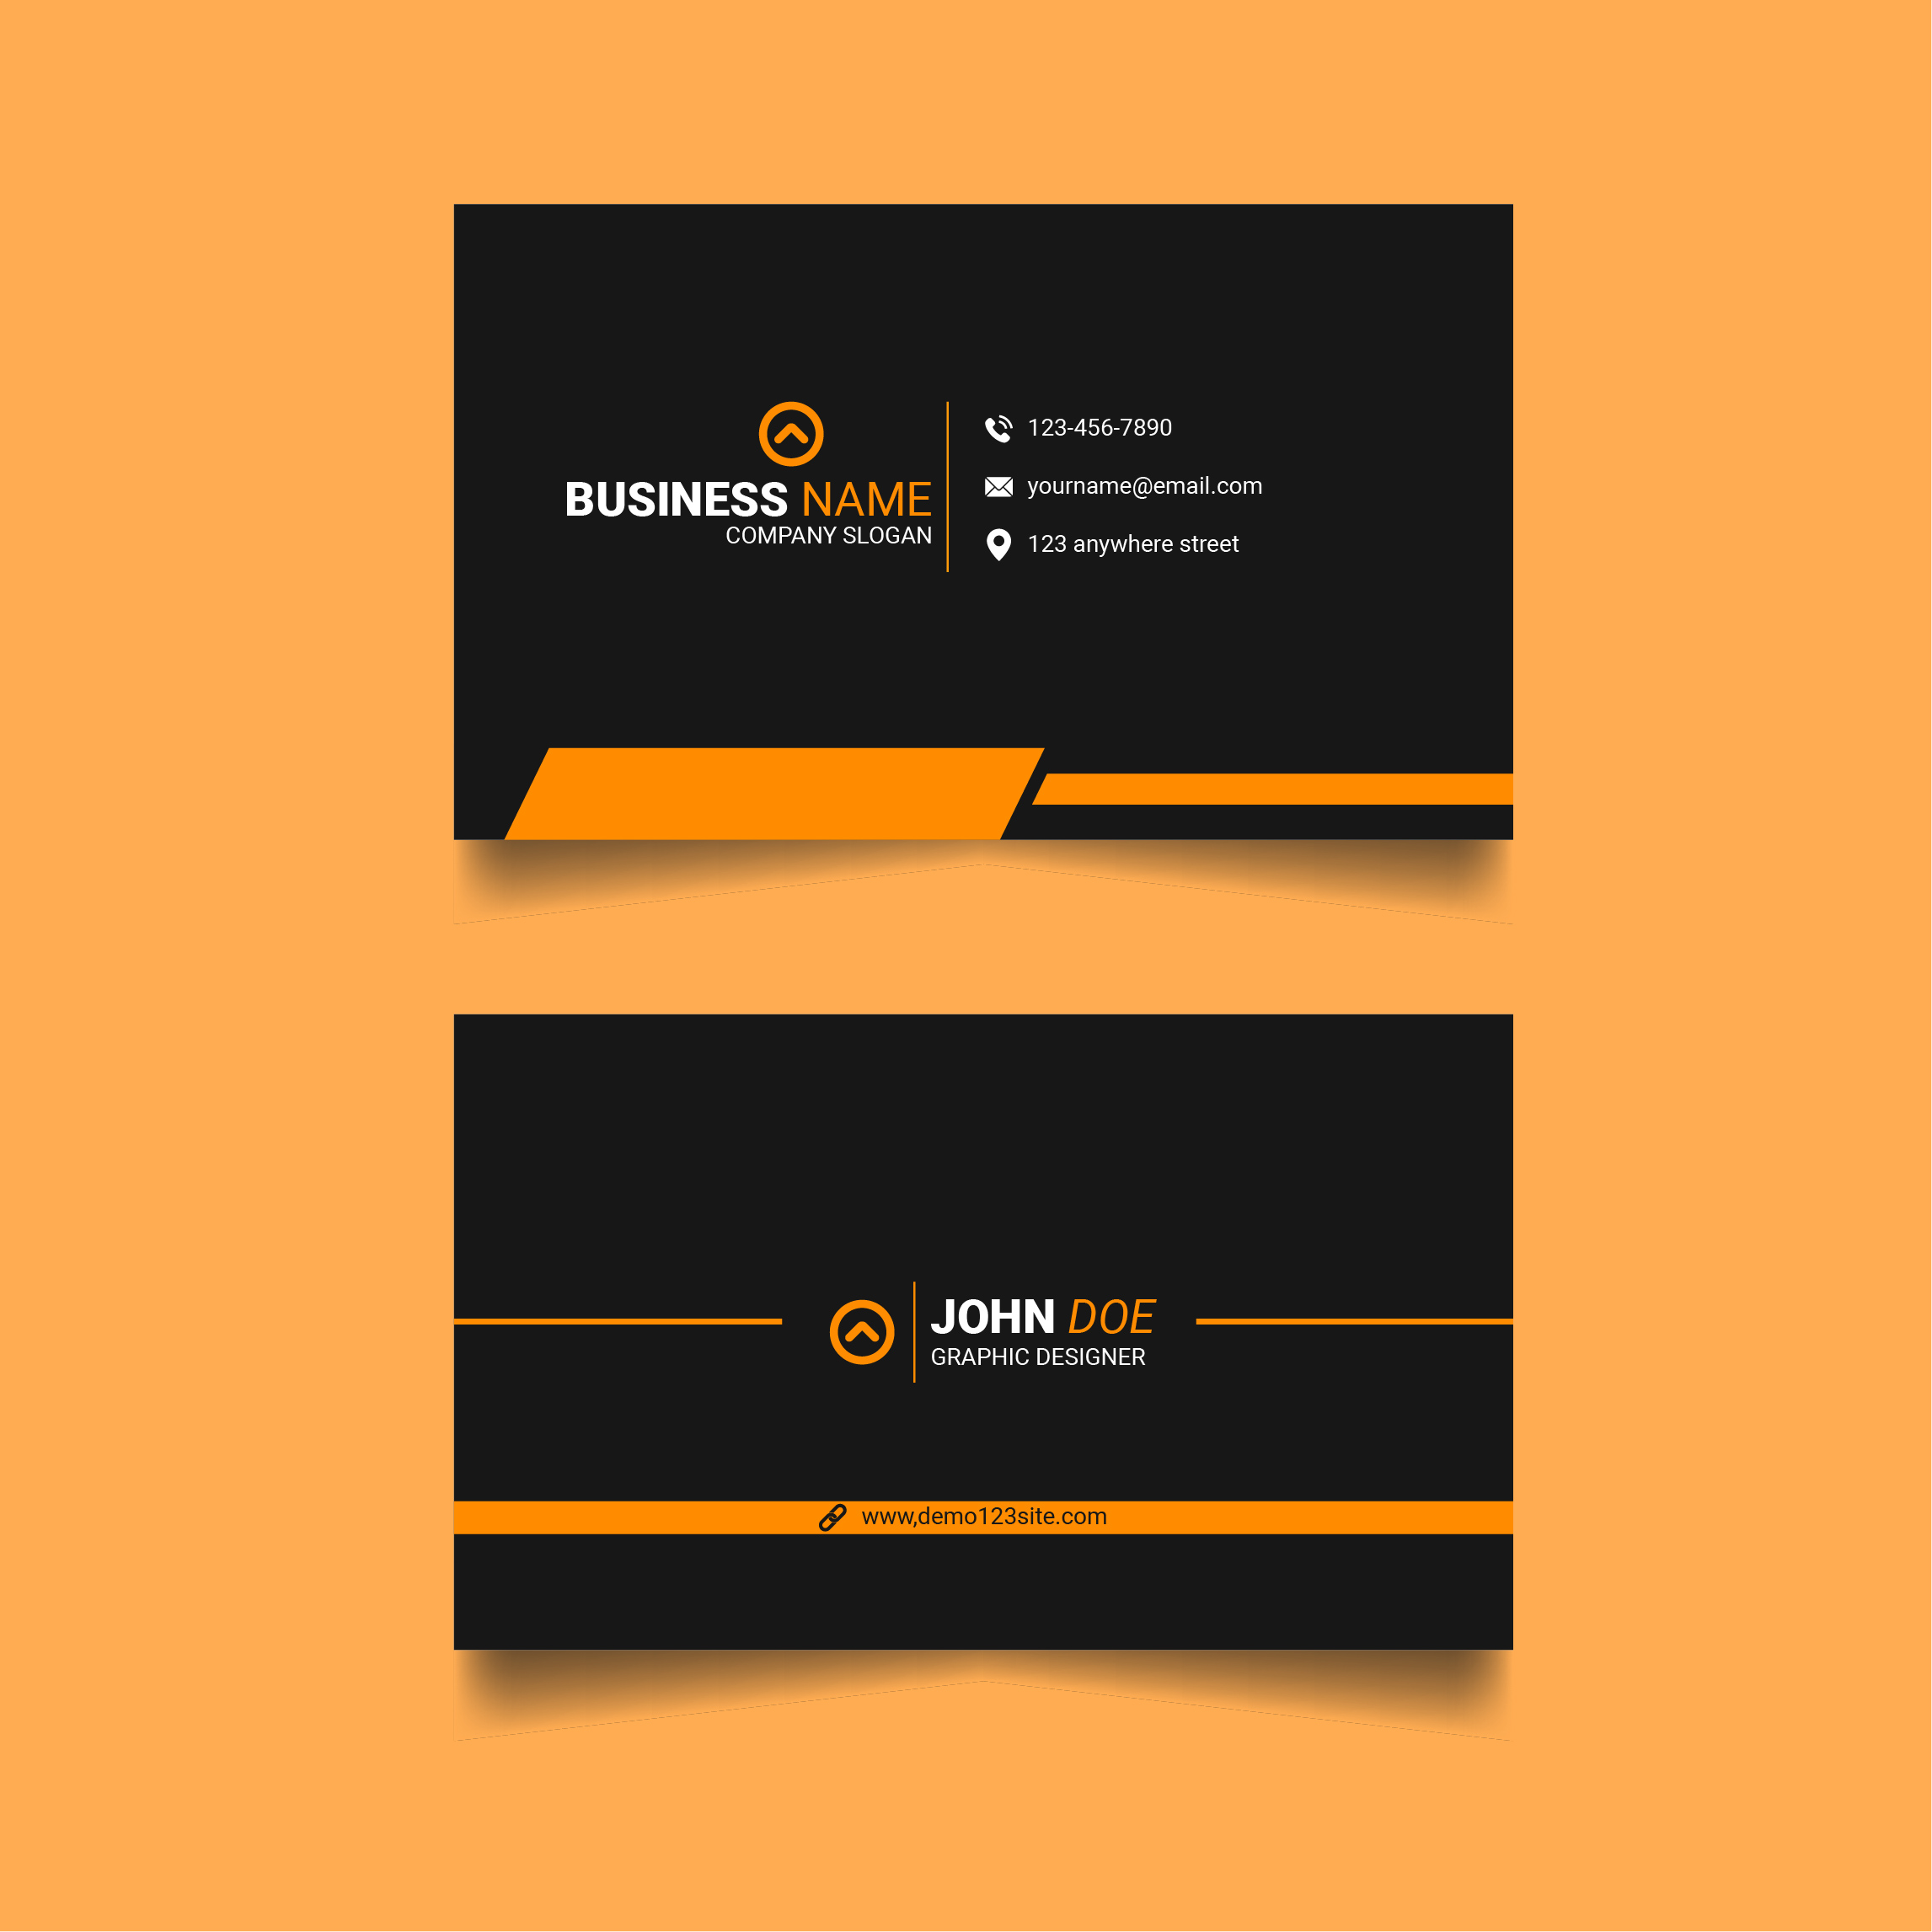 Creative Modern Business Card Template Design cover image.